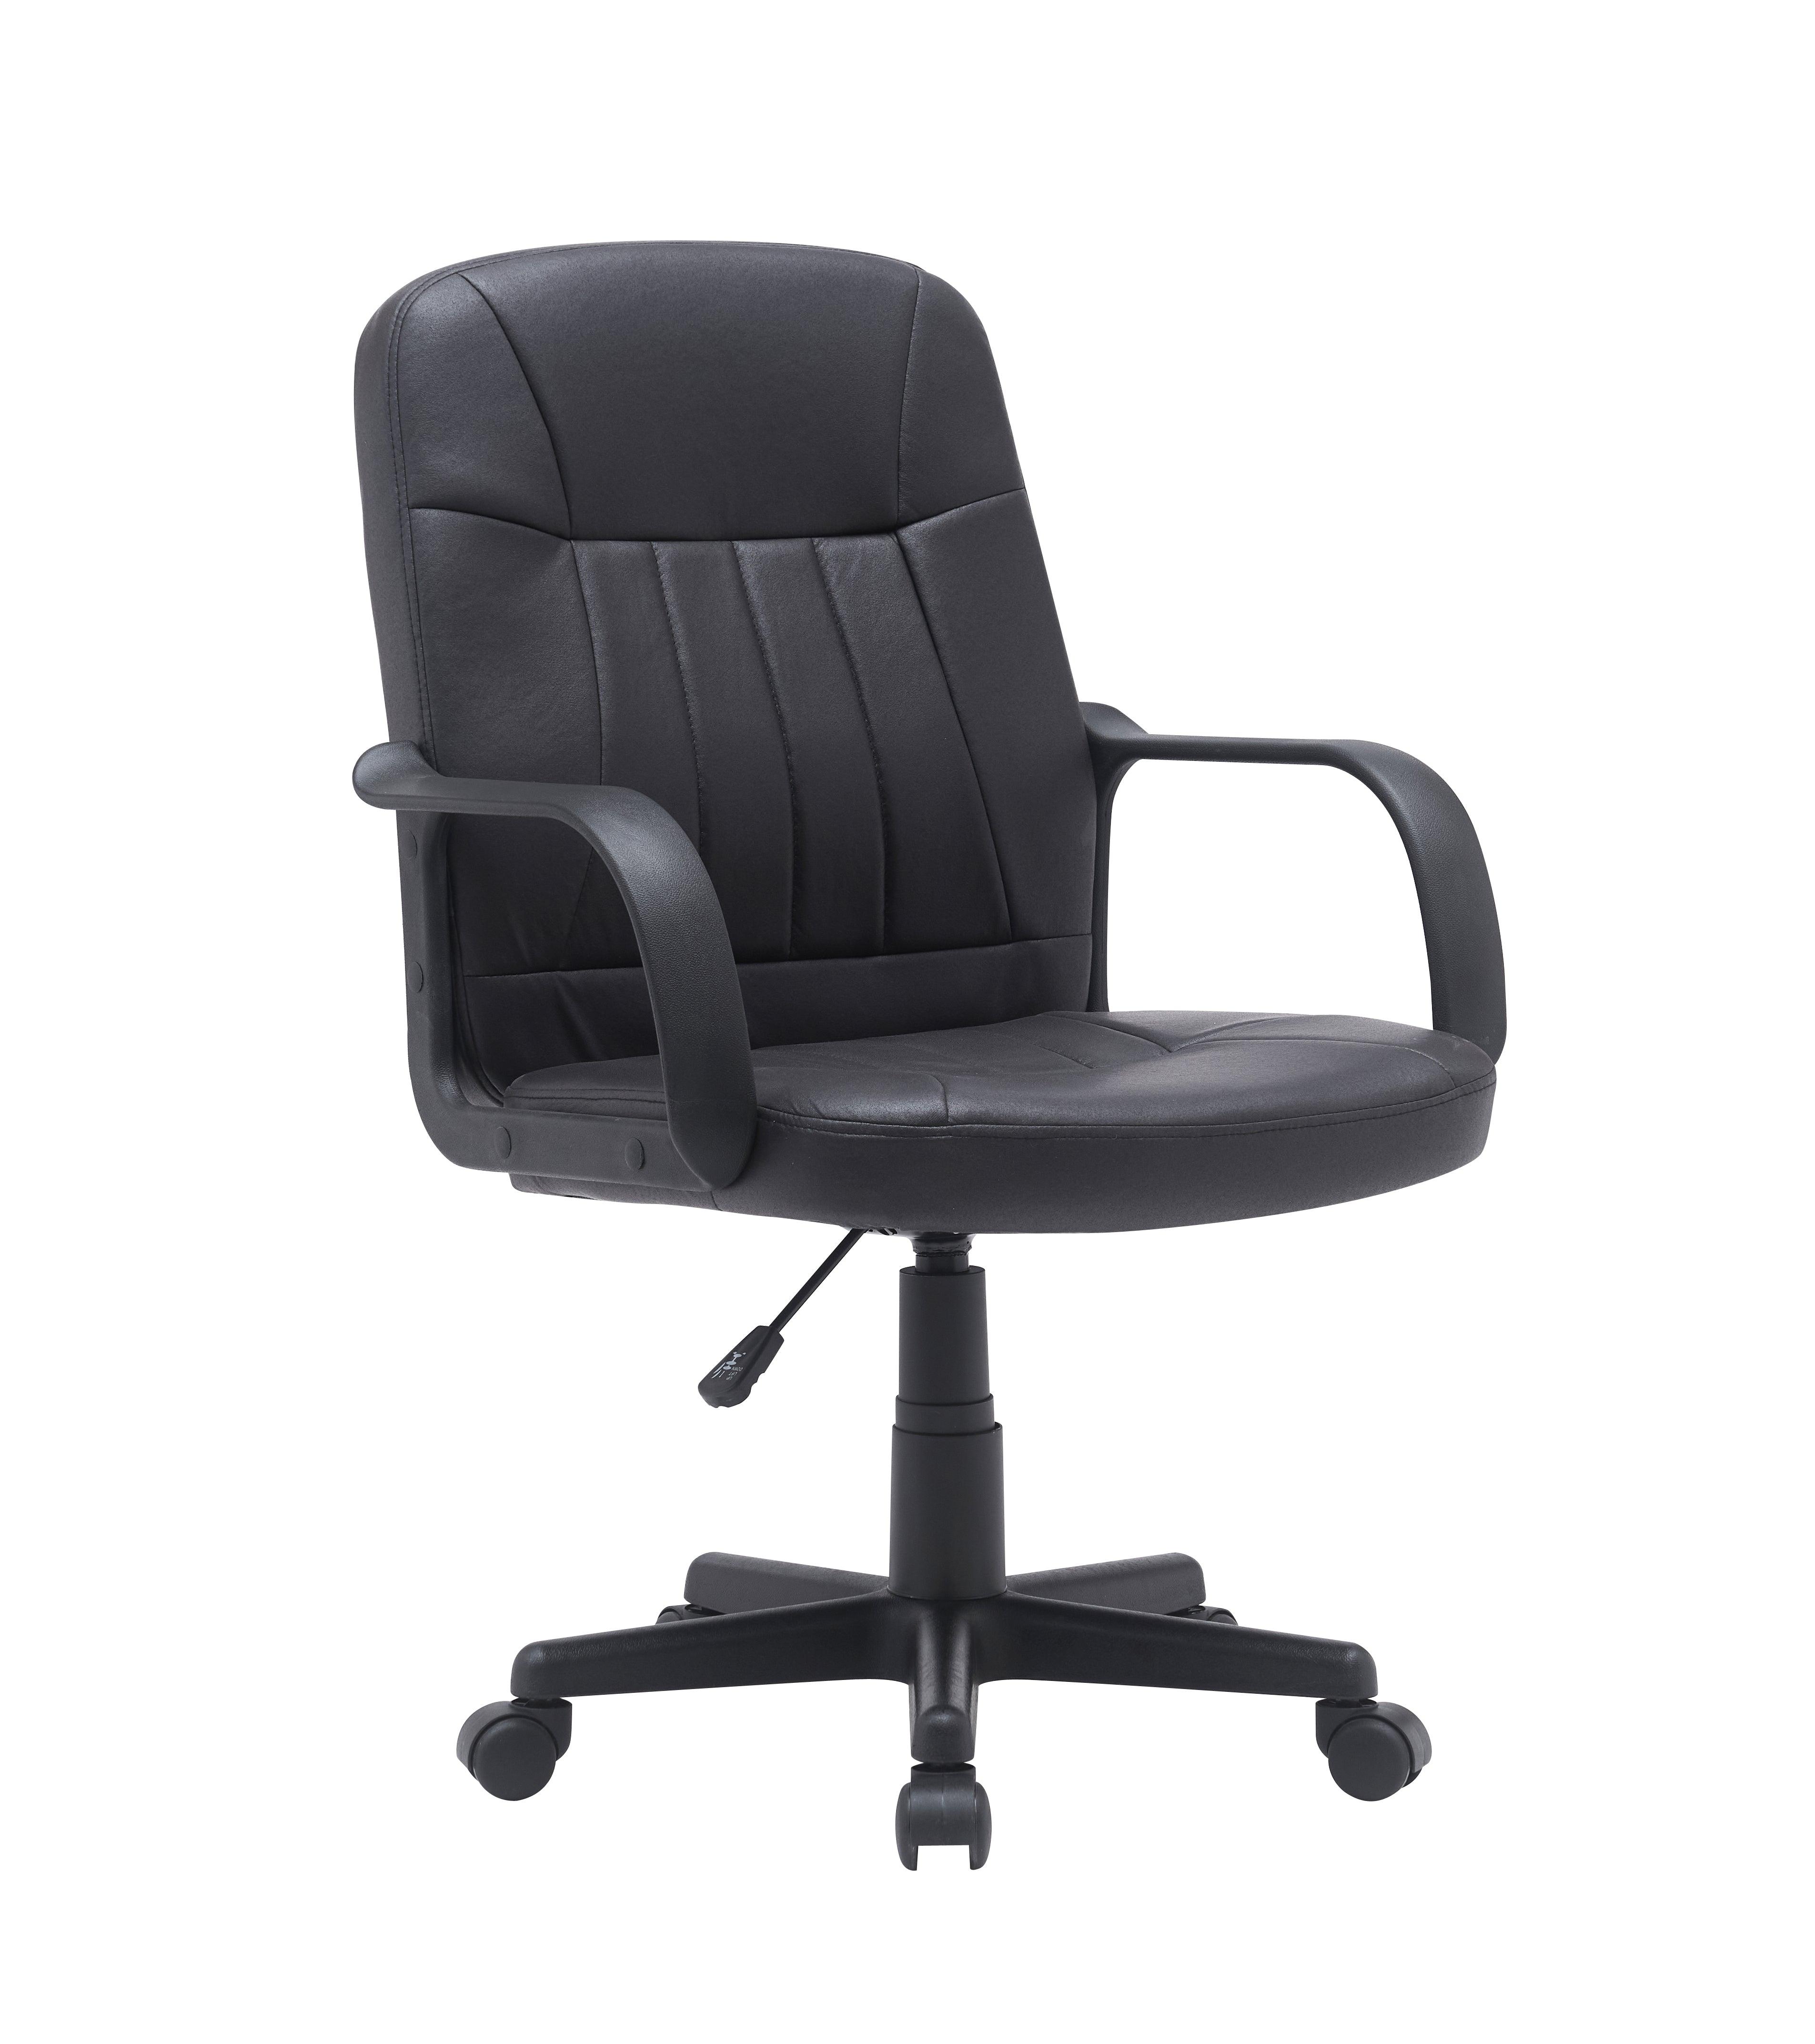 Clontarf Office Chair - Black Technology Fabric - Adjustable Height - Reclining Feature - Home Office Furniture